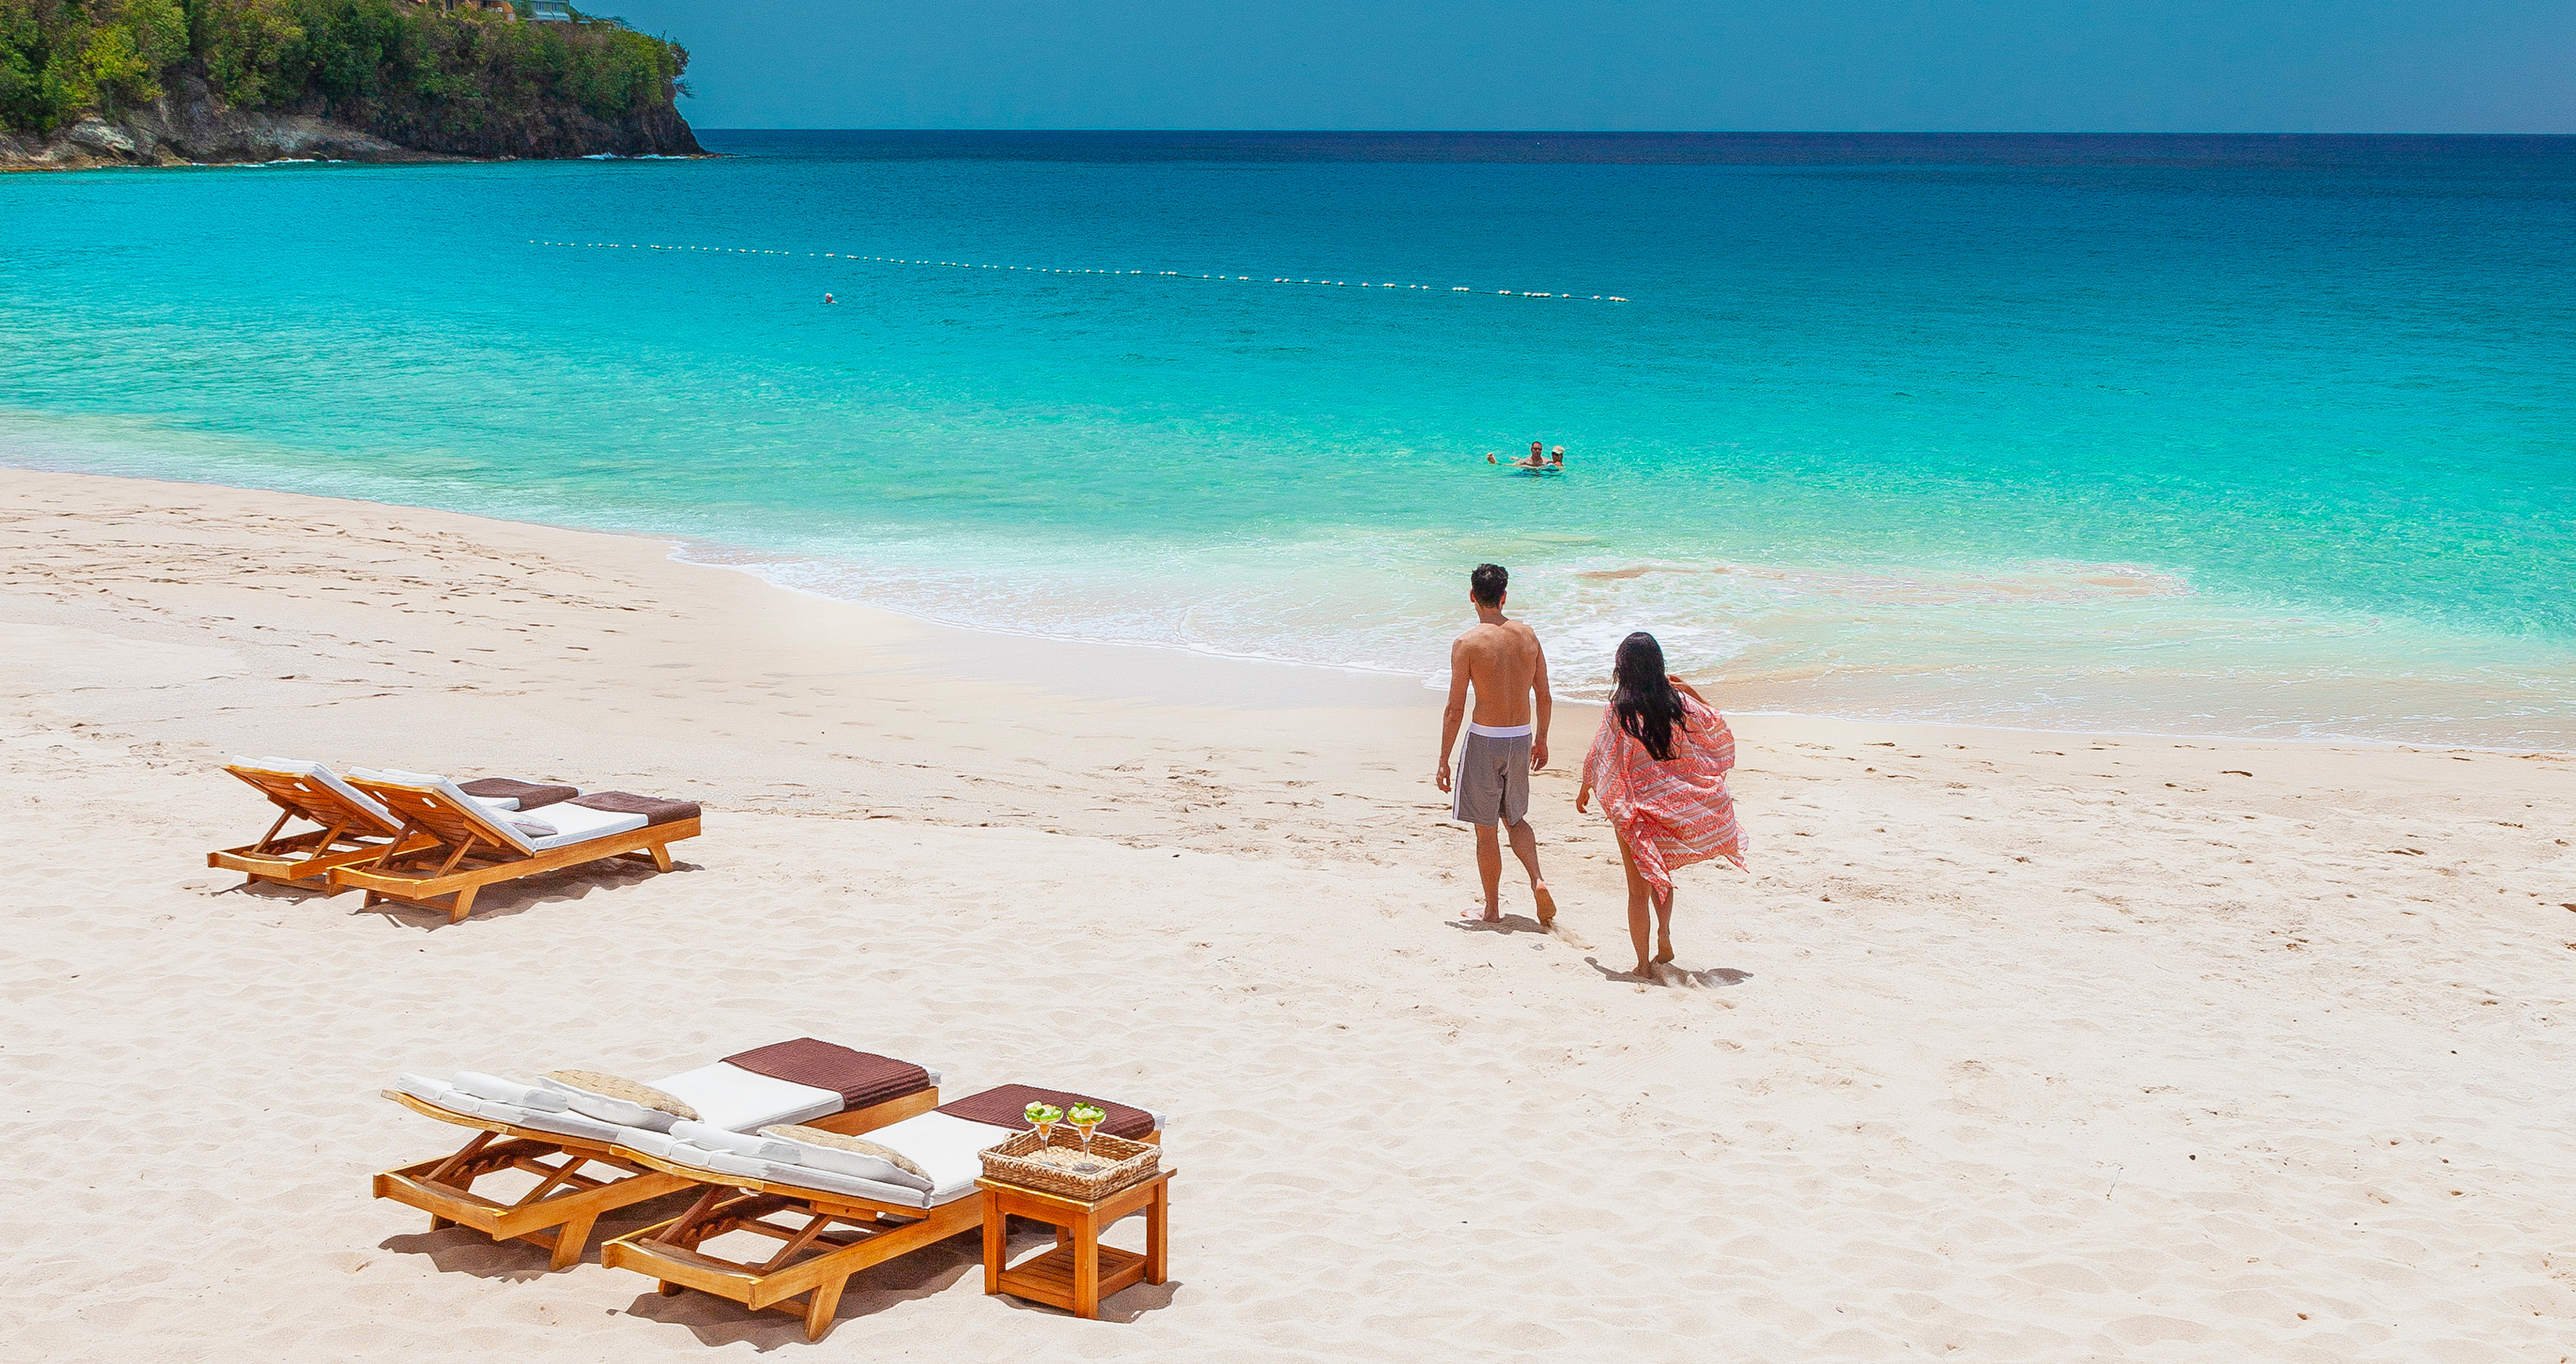 Winter Sale On Resorts: Caribbean Now Sandals® Blues